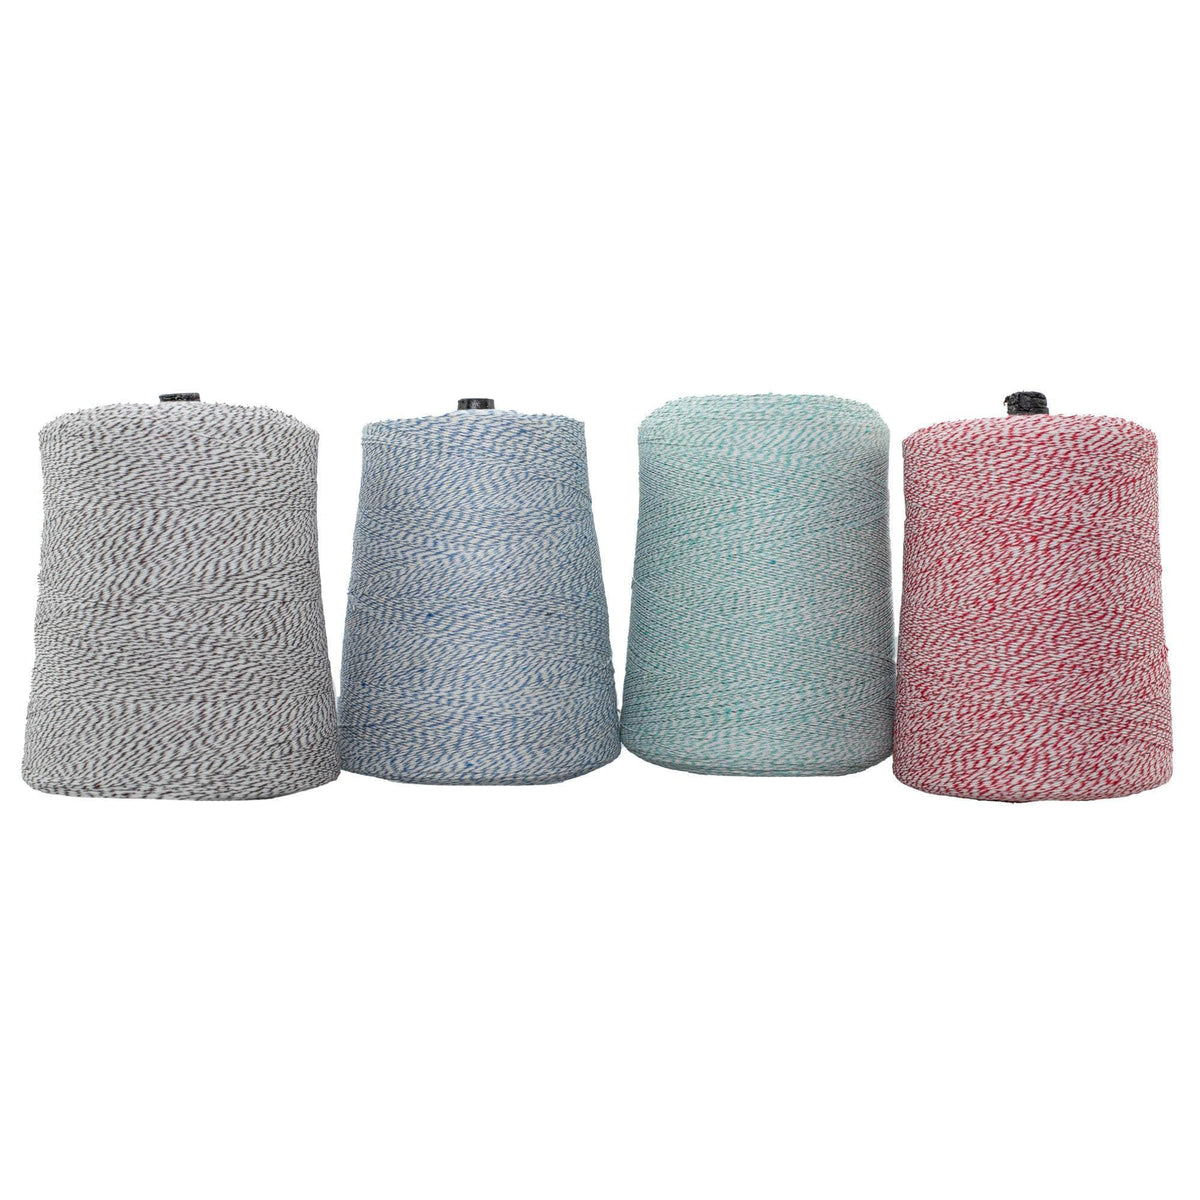 Cotton/Polyester Blend Twine 8's (6 Ply x 2LB Cone)